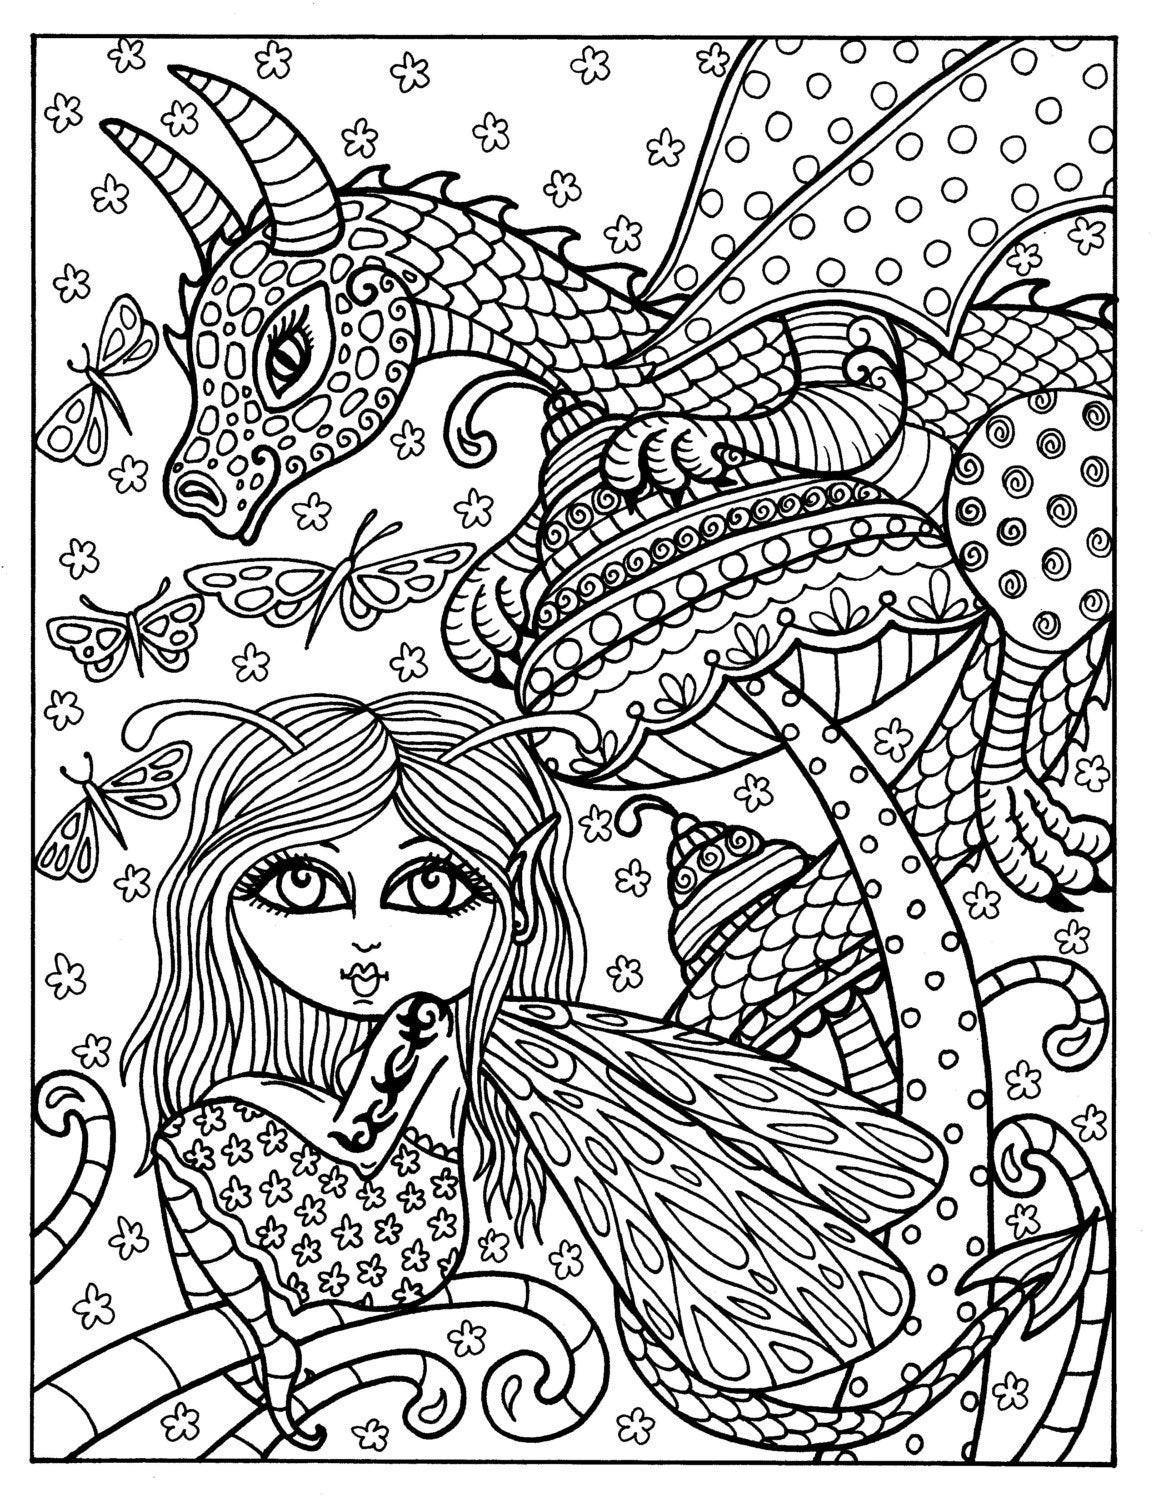 Dragon Coloring Books For Adults
 Fairy and Dragon Instant Adult coloring fantasy art